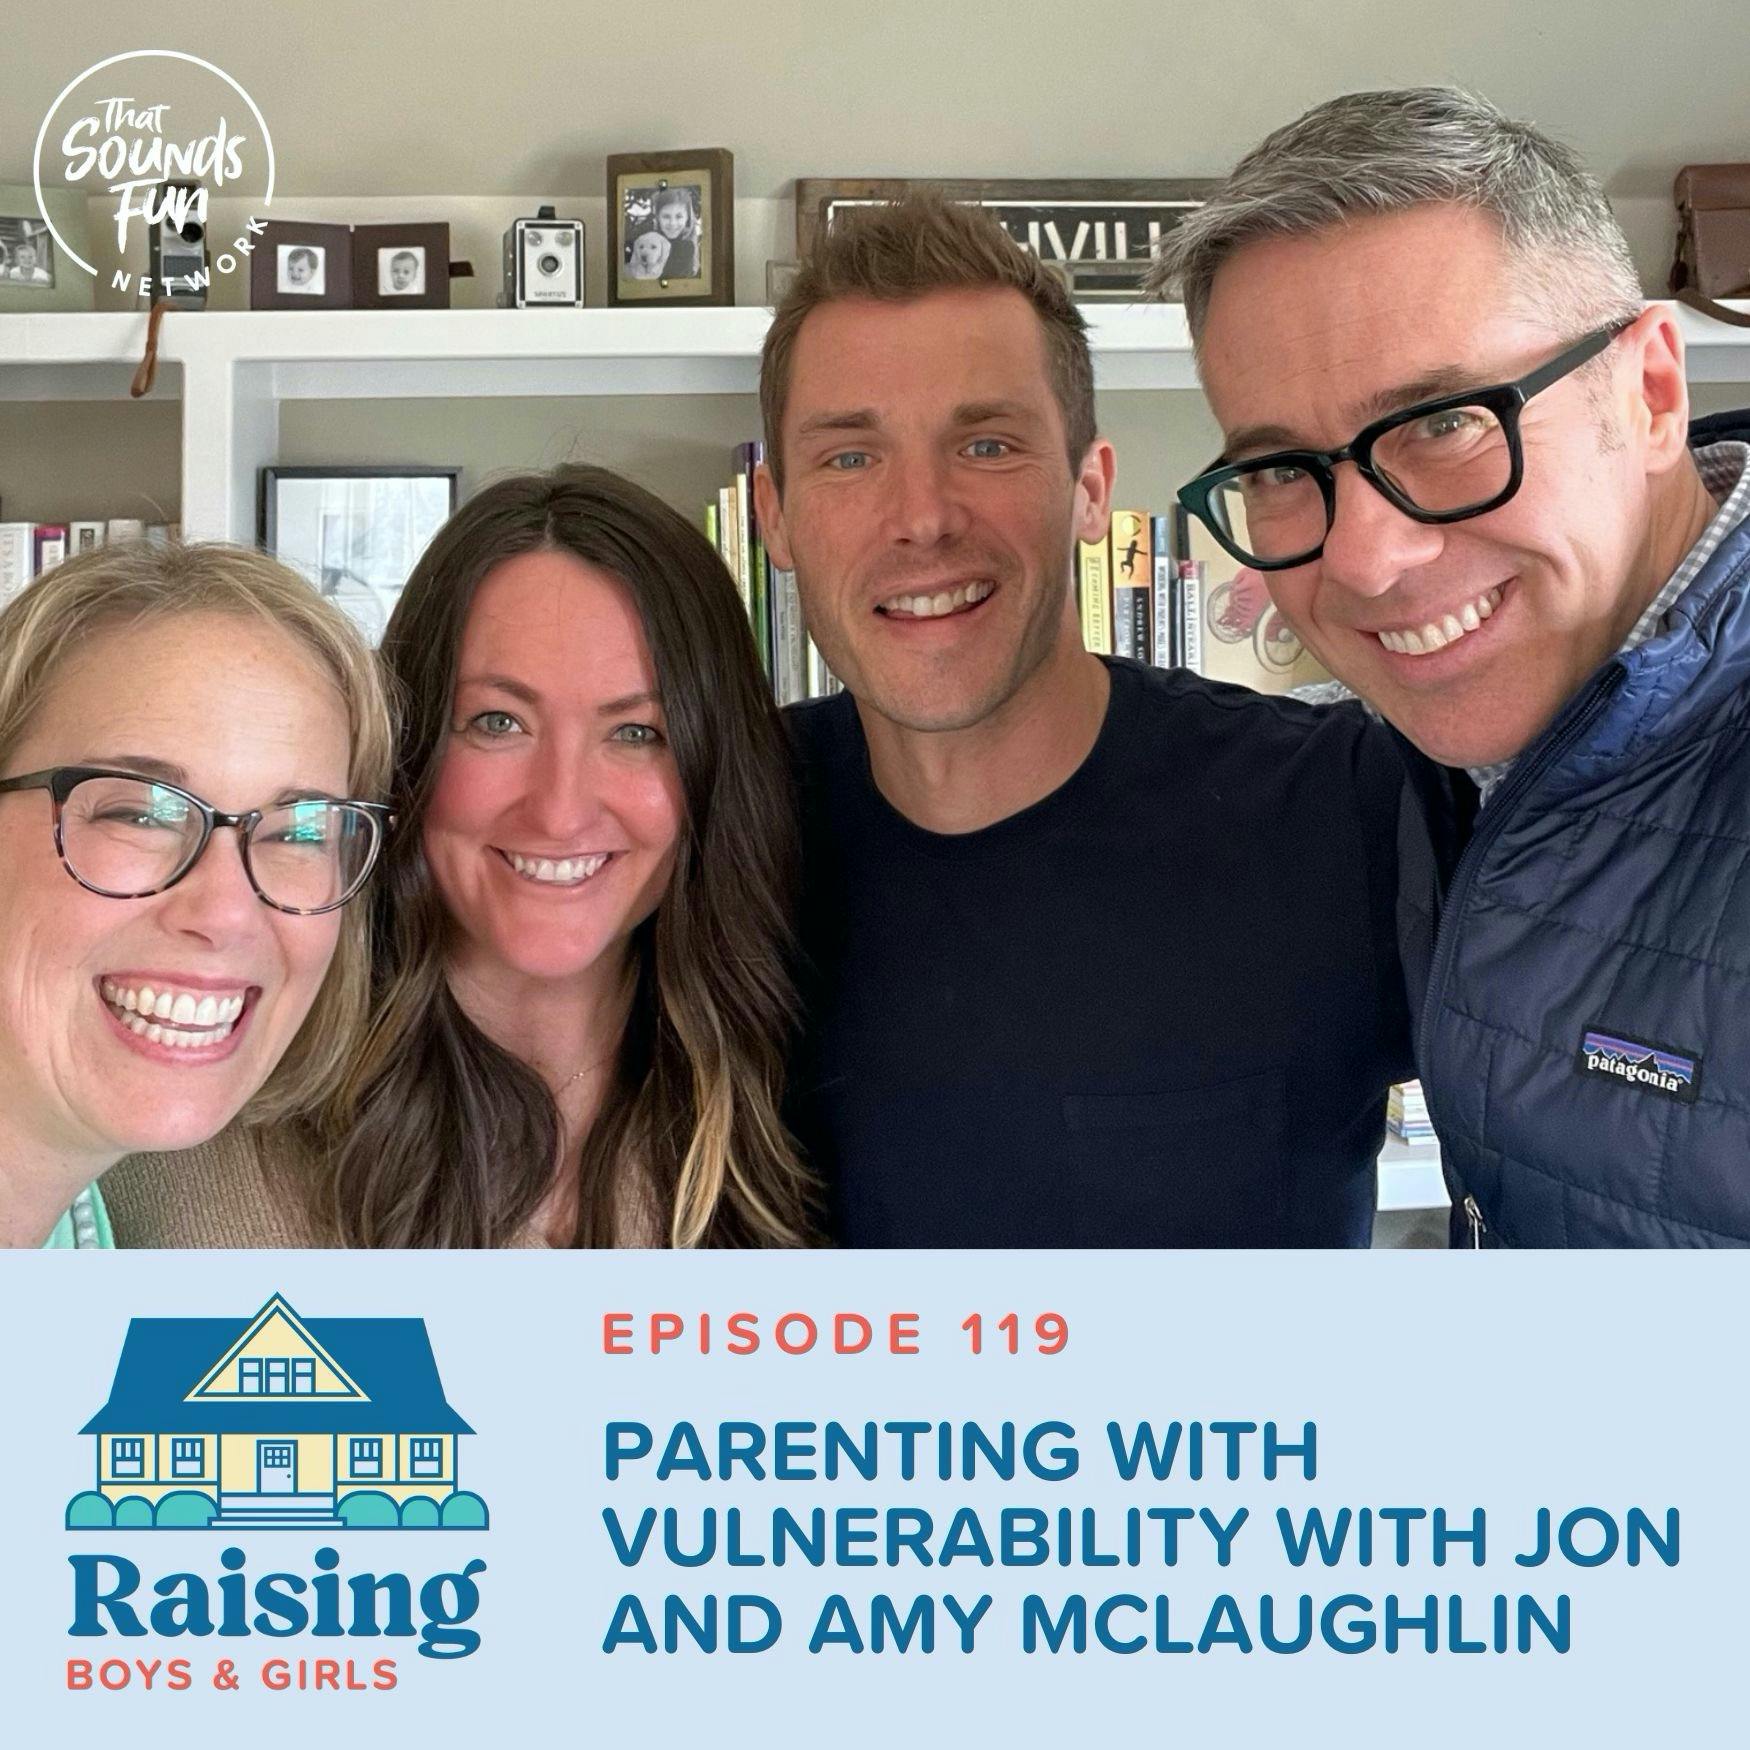 Episode 119: Parenting with Vulnerability with Jon and Amy McLaughlin